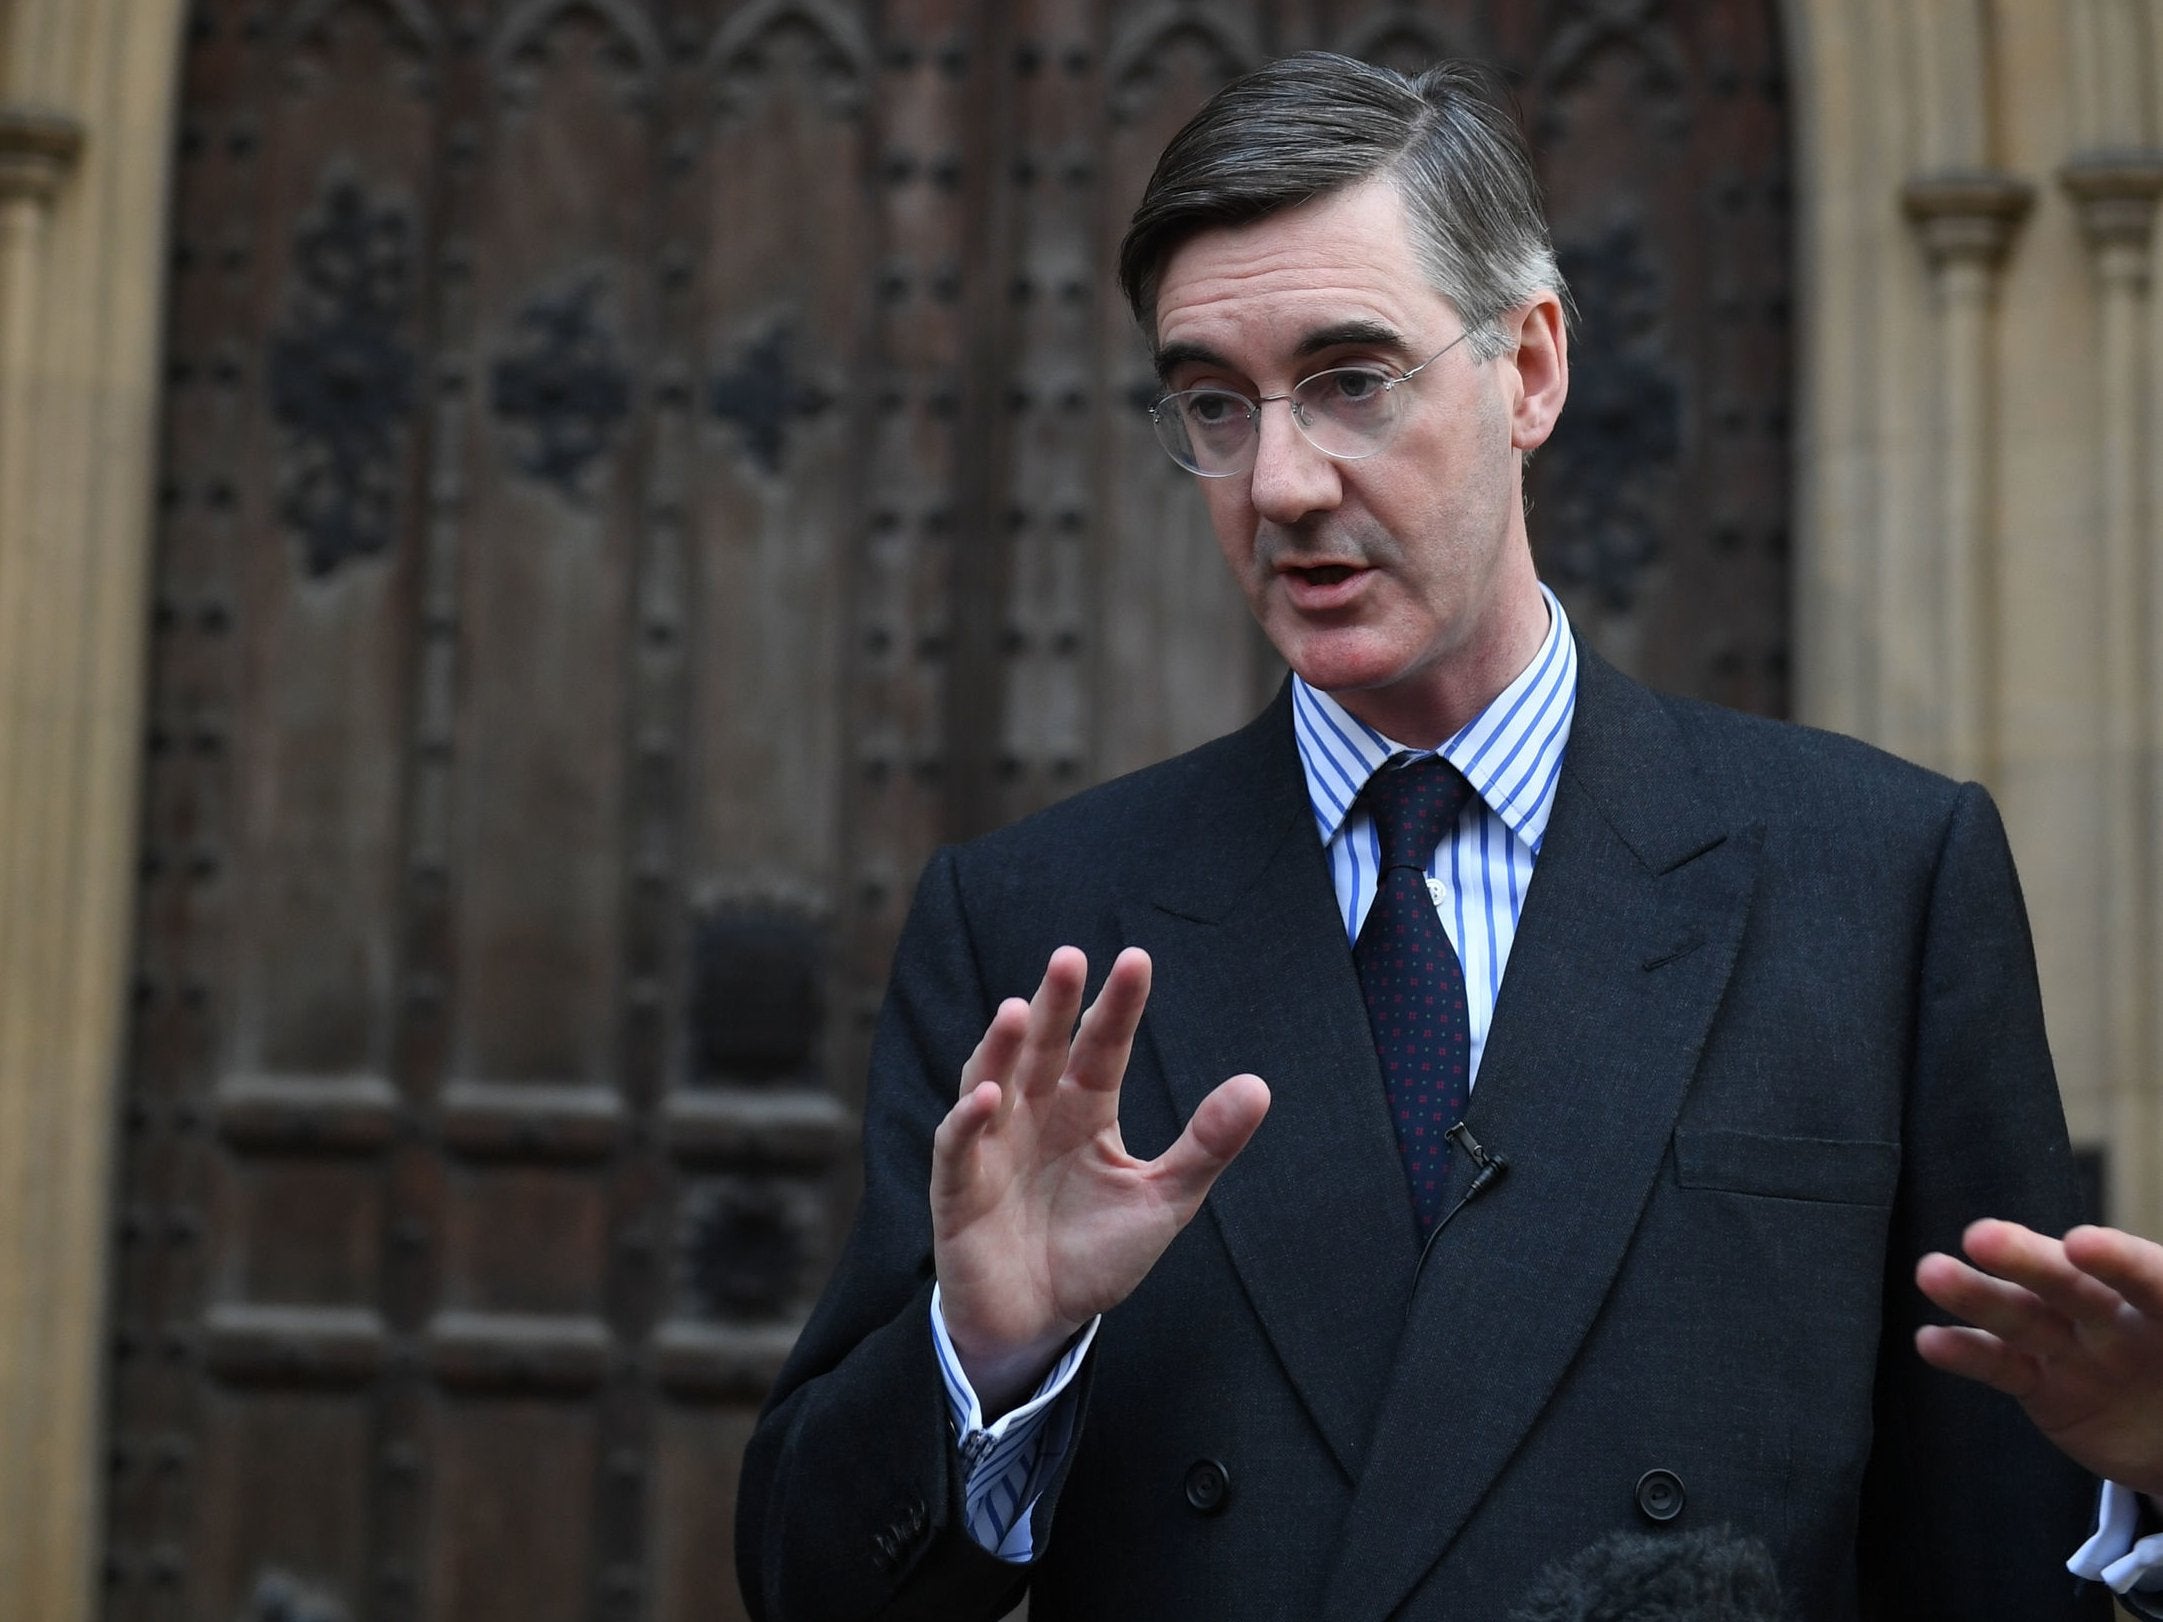 CEOs wear suits. So does Jacob Rees-Mogg